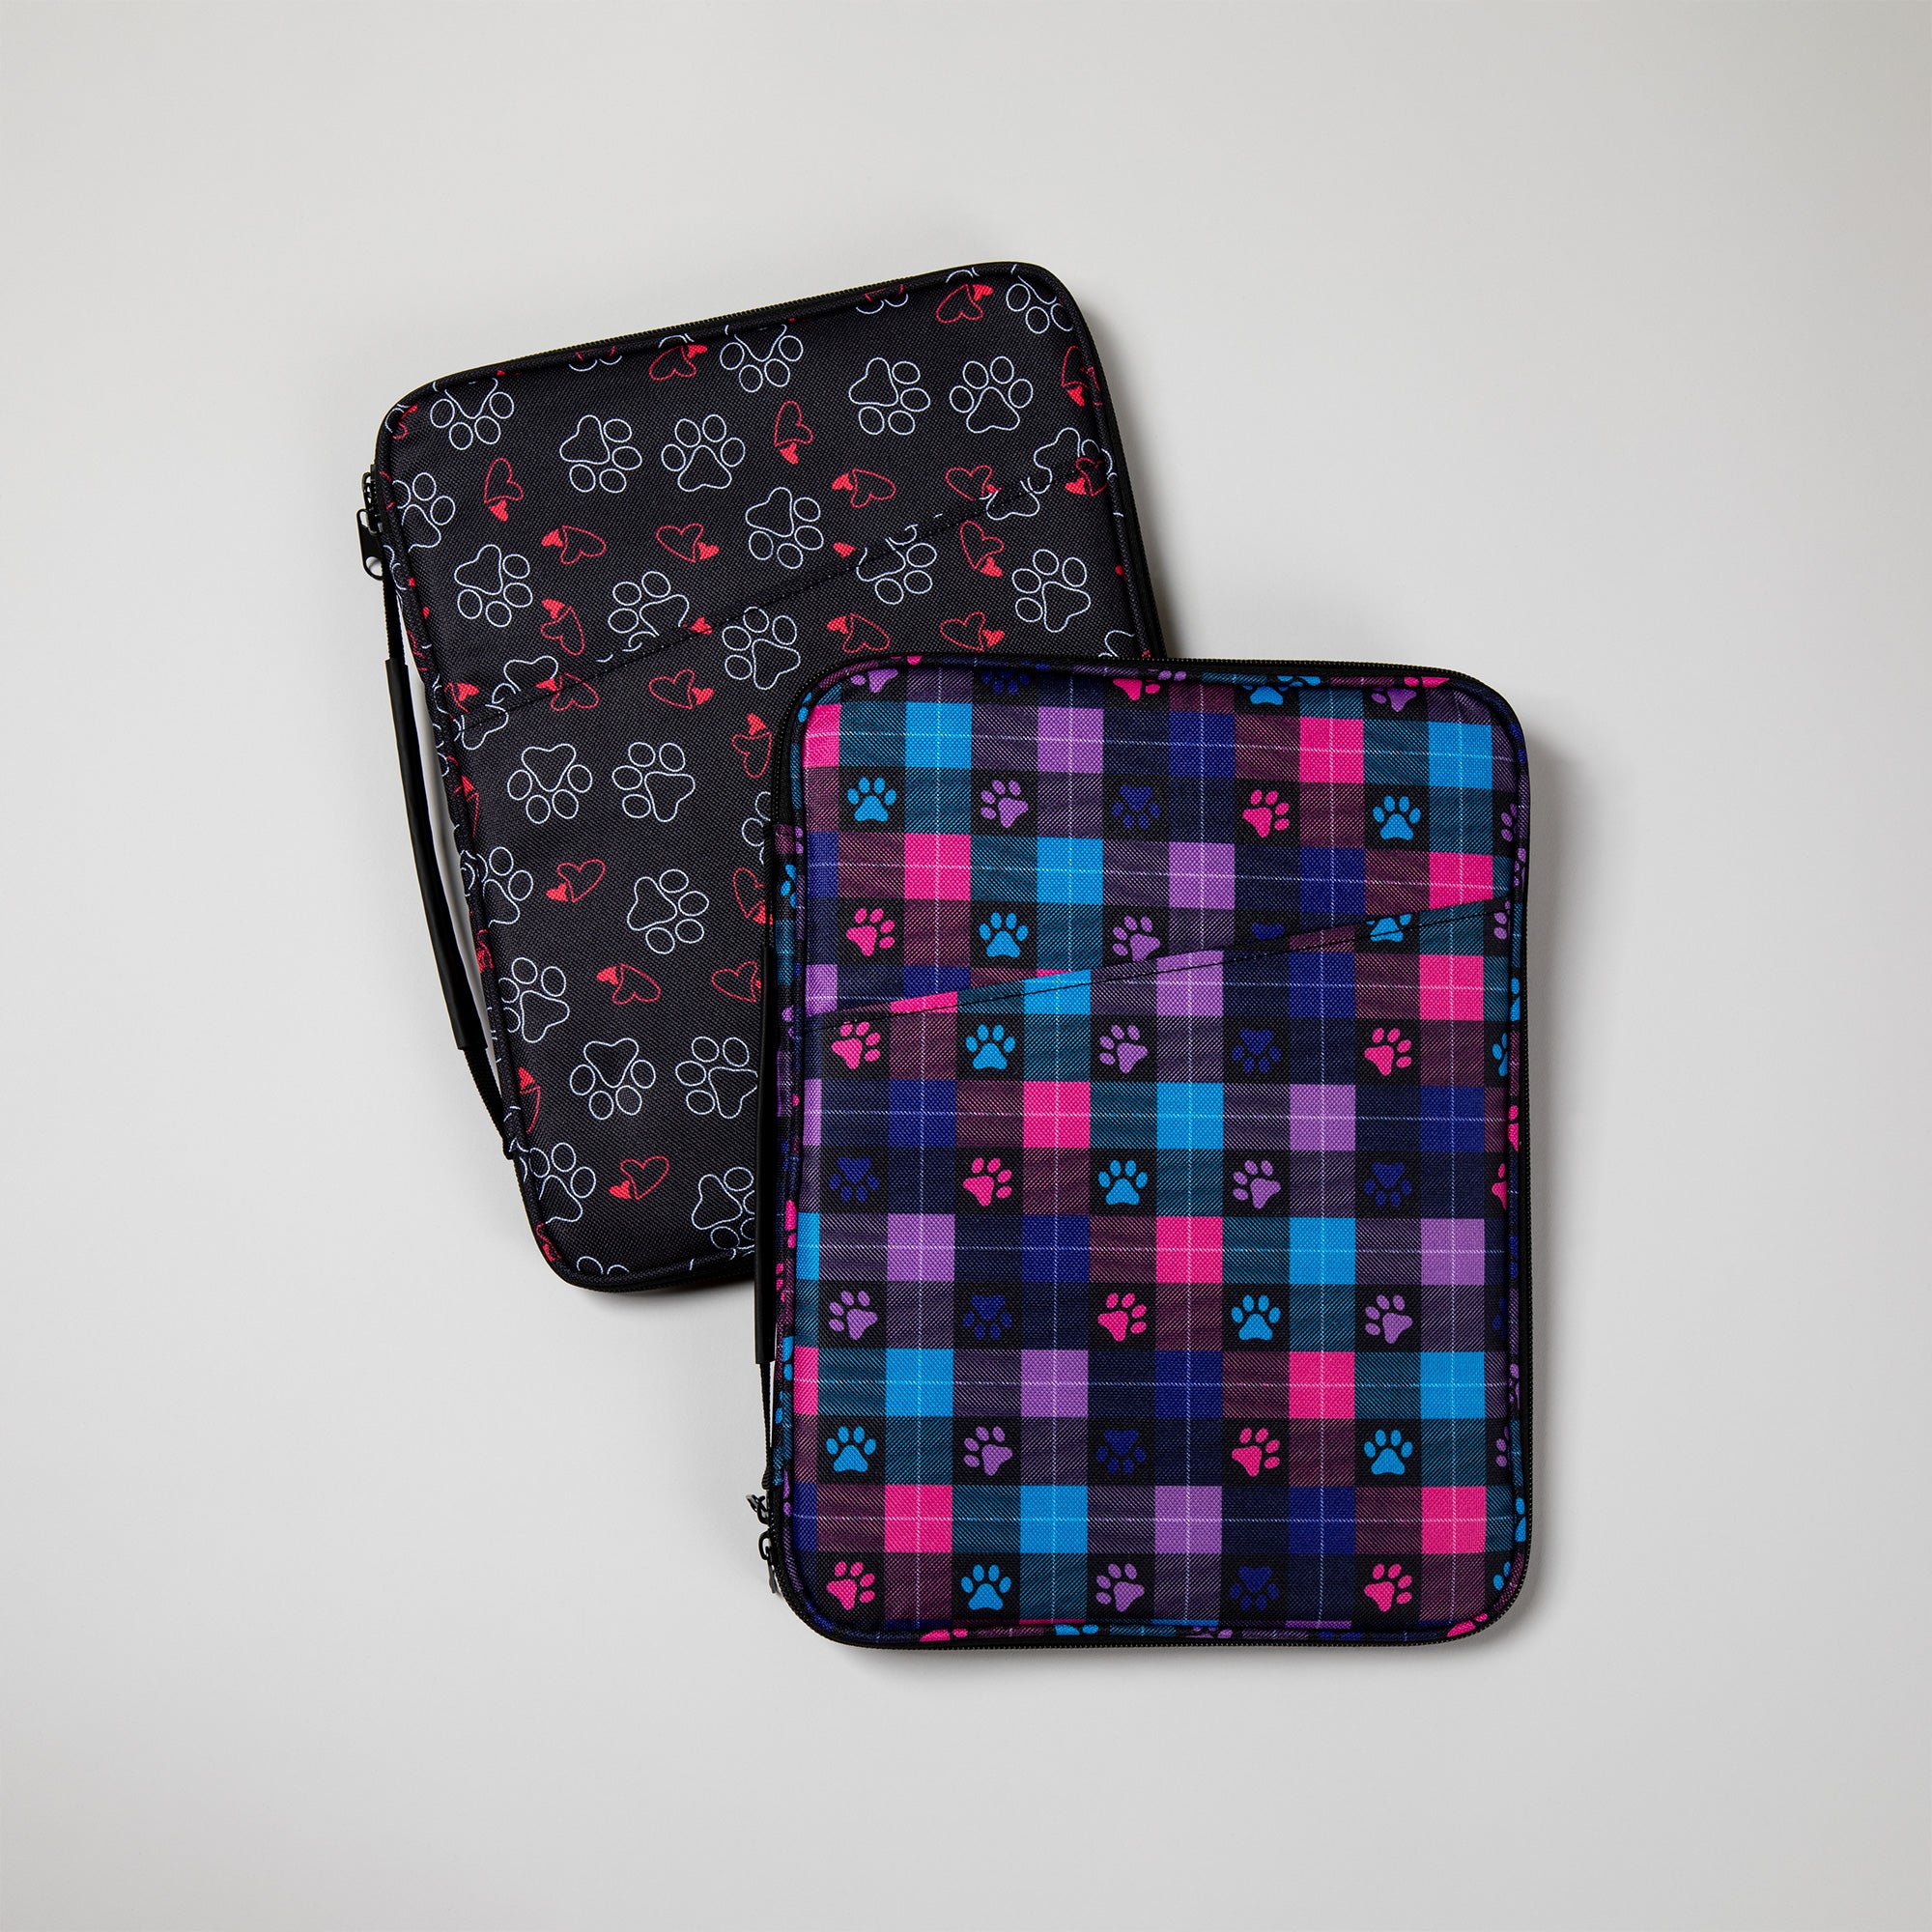 Pawfectly Patterned Tablet Case - Outlined Paws & Hearts